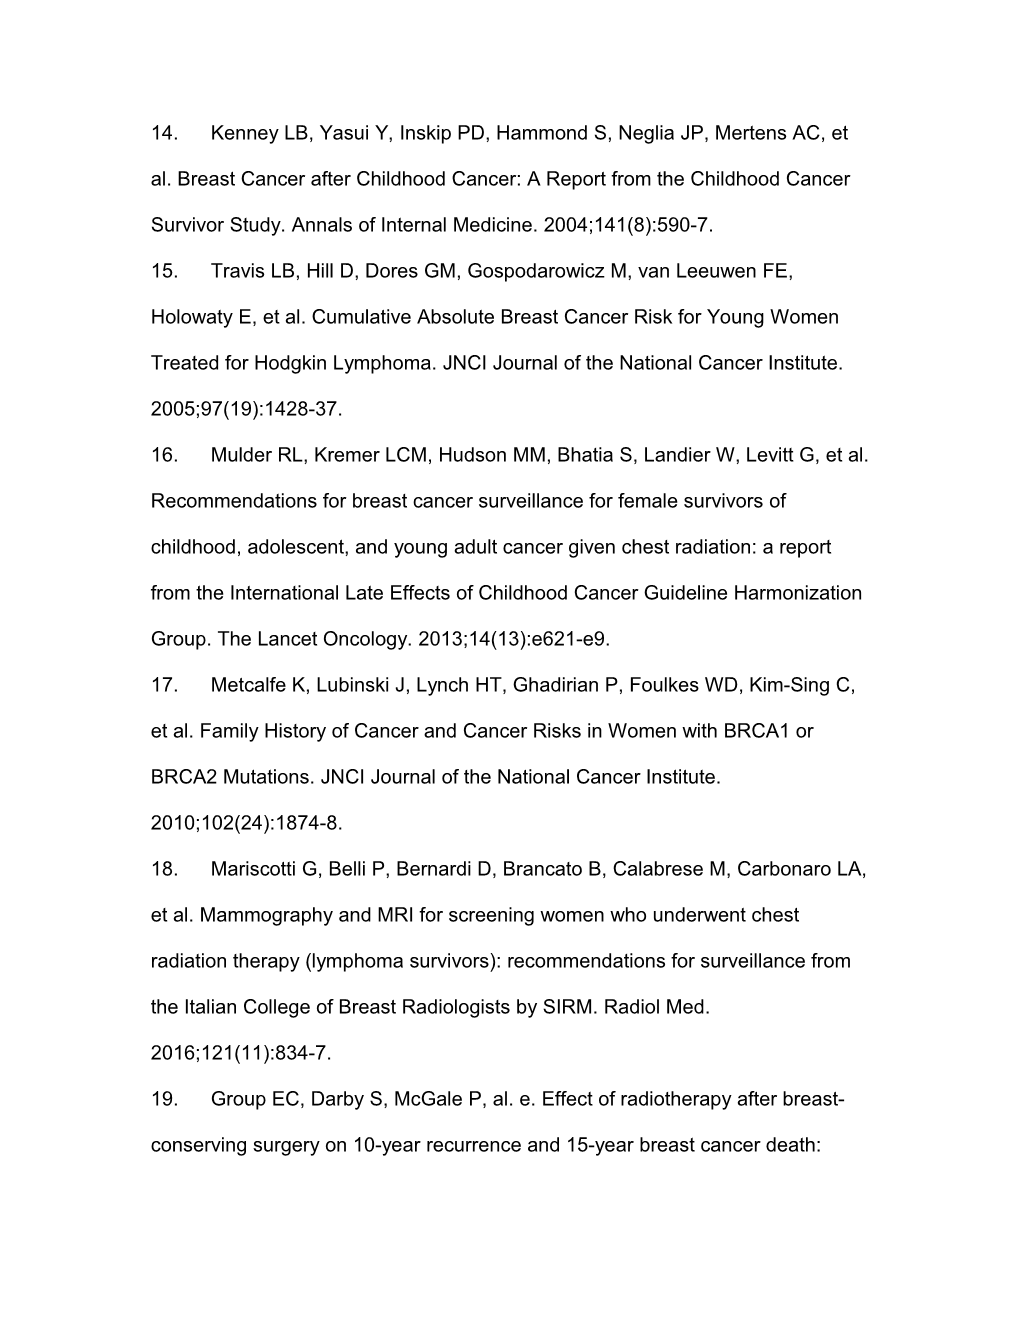 Breast Cancer Screening in Women at Higher Than Average Risk: Recommendations from The